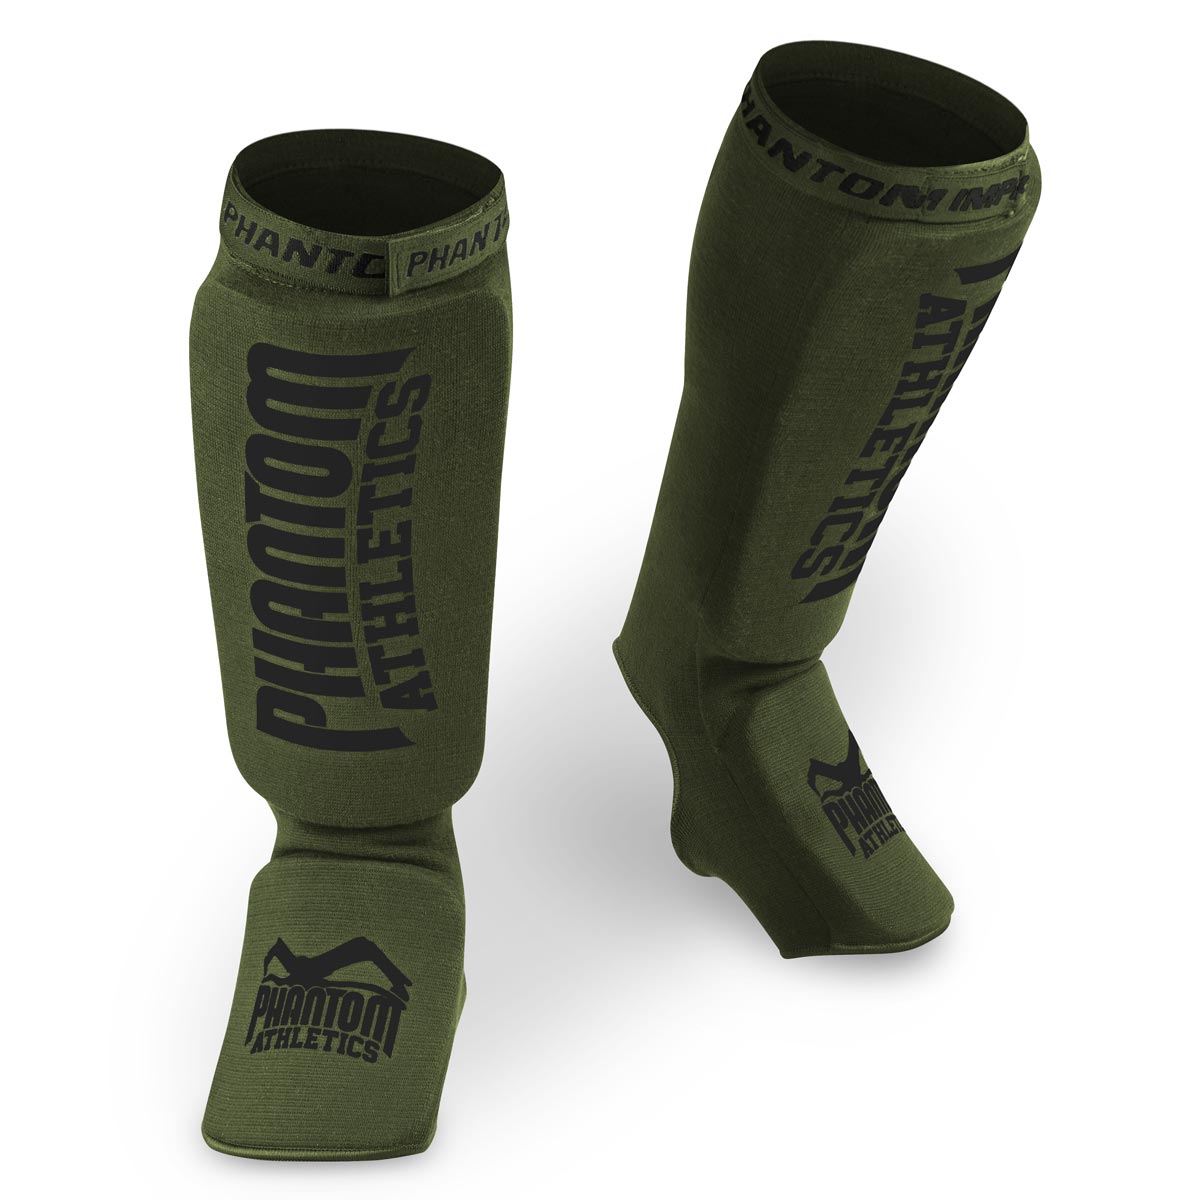 The Phantom Impact MMA shin guards in army green for martial arts training and competition.